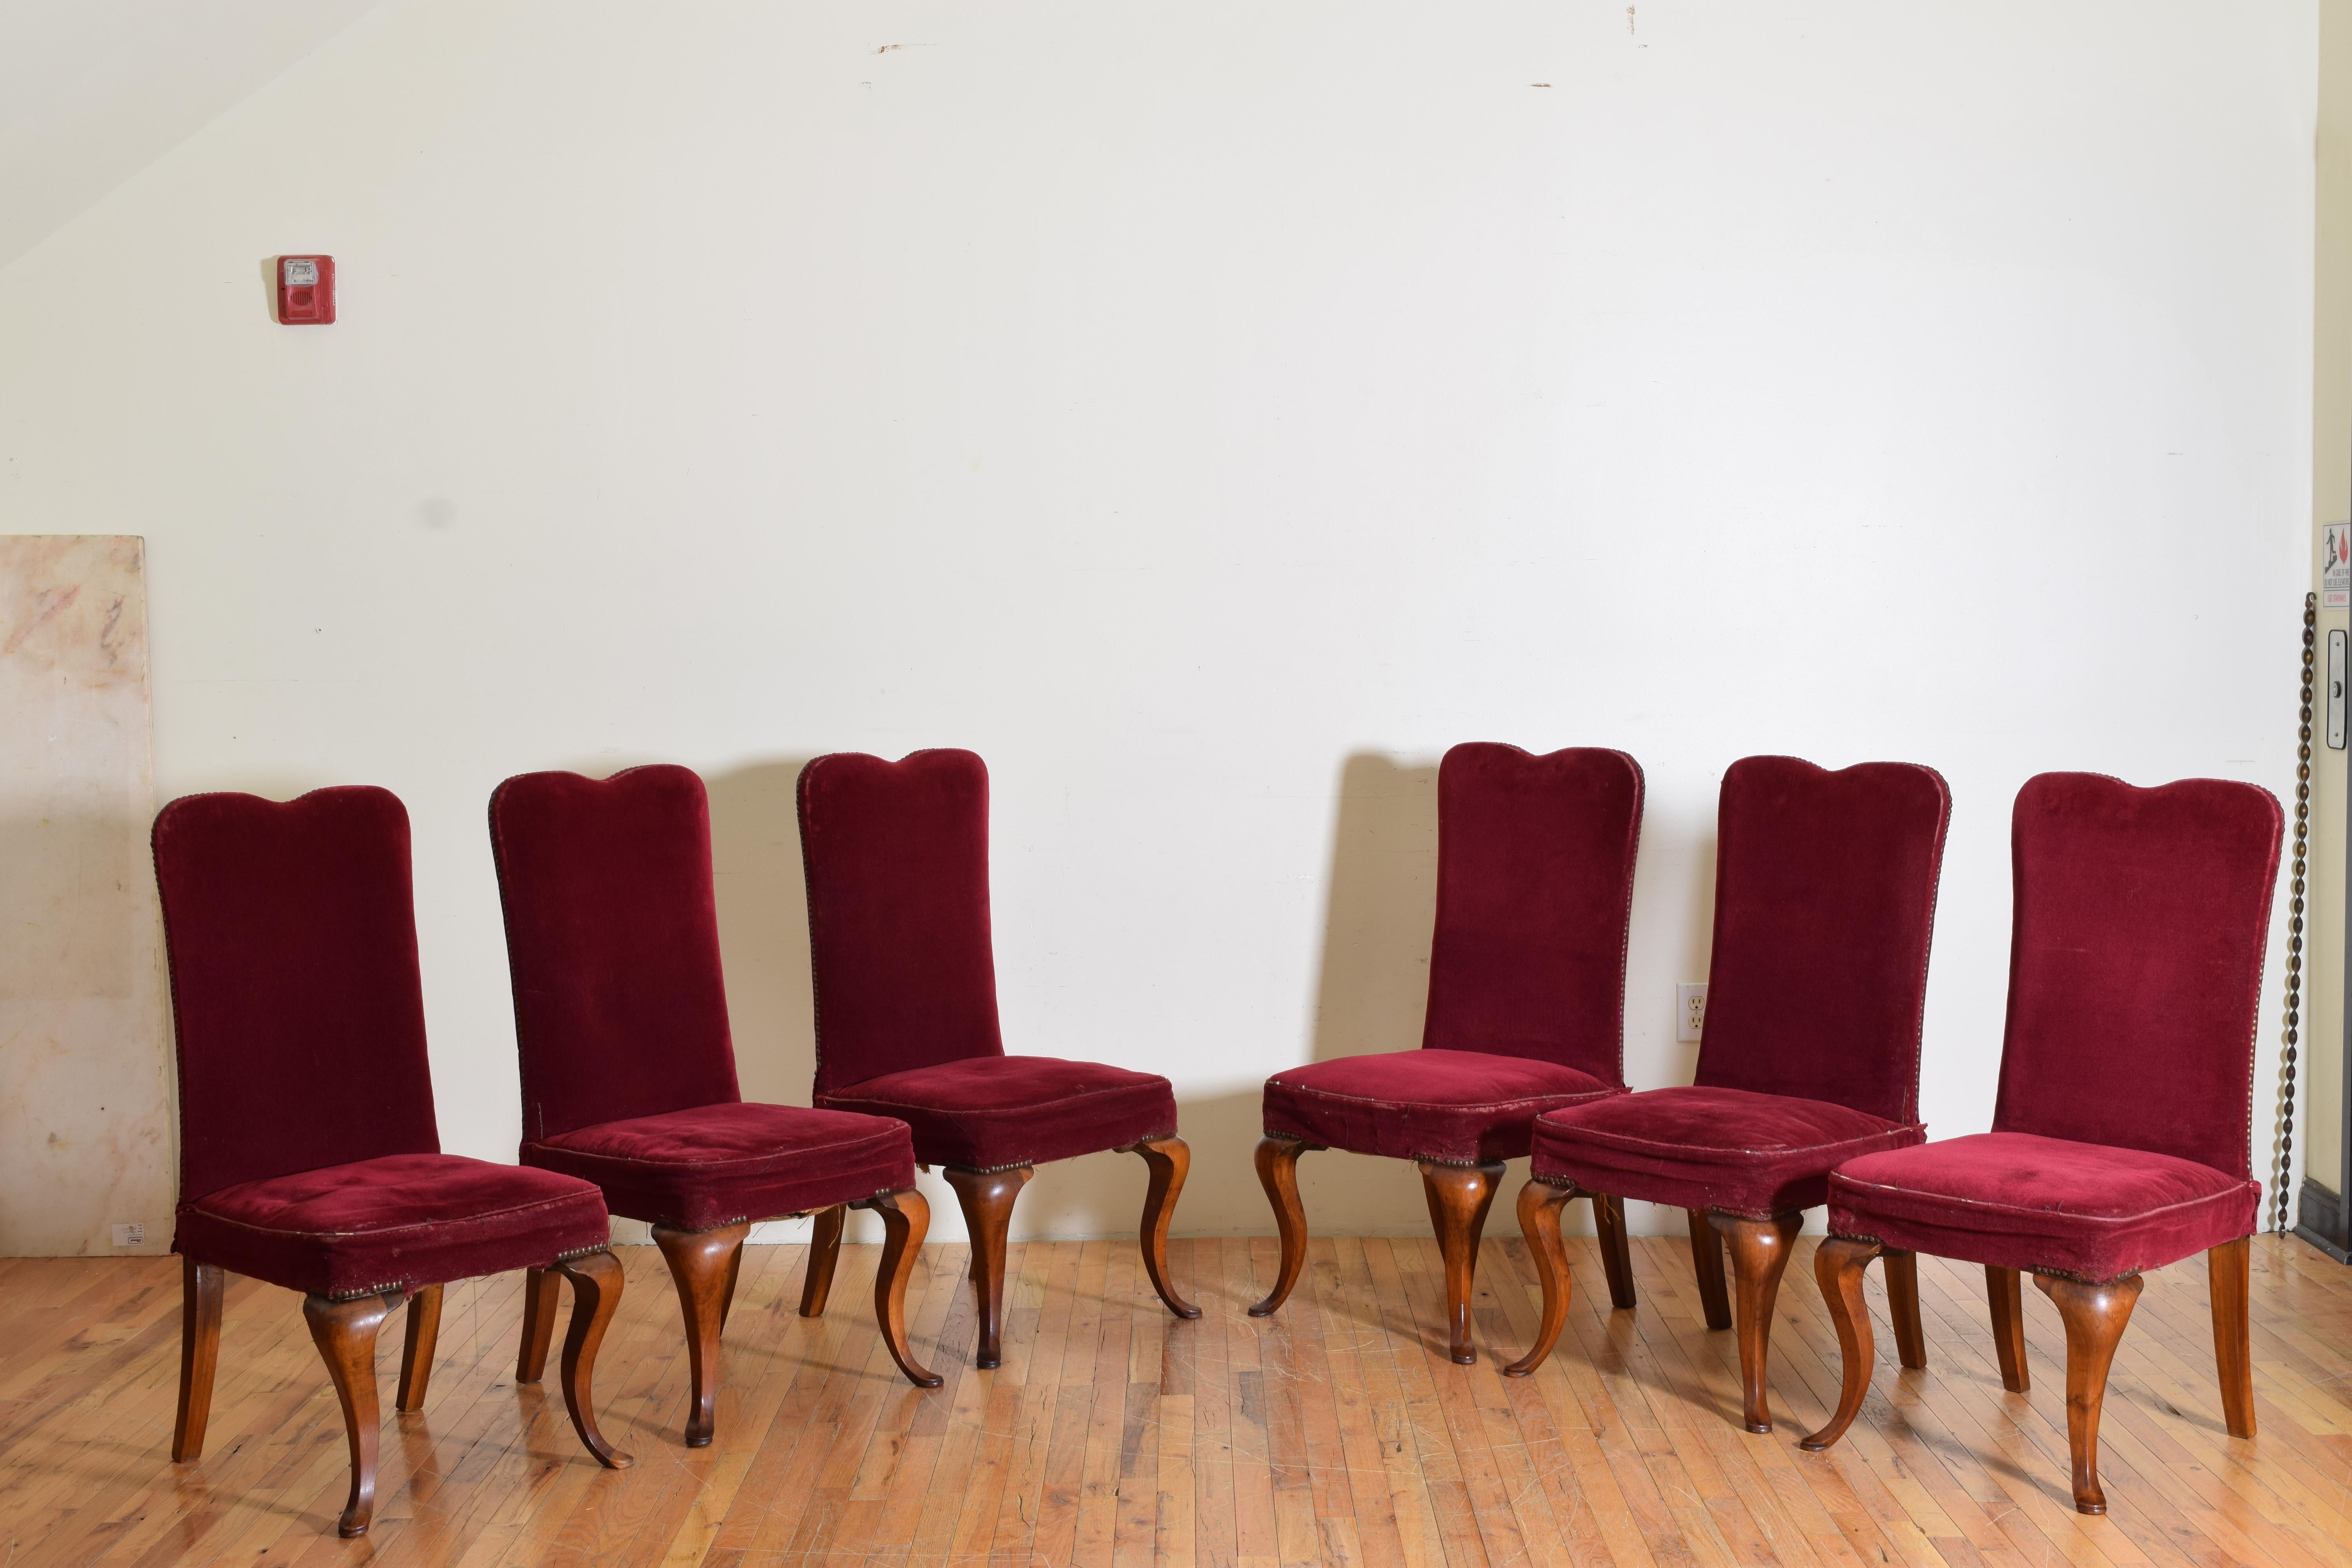 Upholstered in vintage red velvet these dining chairs have mustache shaped backrest and generous fitted seats, raised on splayed rear legs and elegantly shaped front legs ending in pad feet, constructed of beautifully grained walnut.